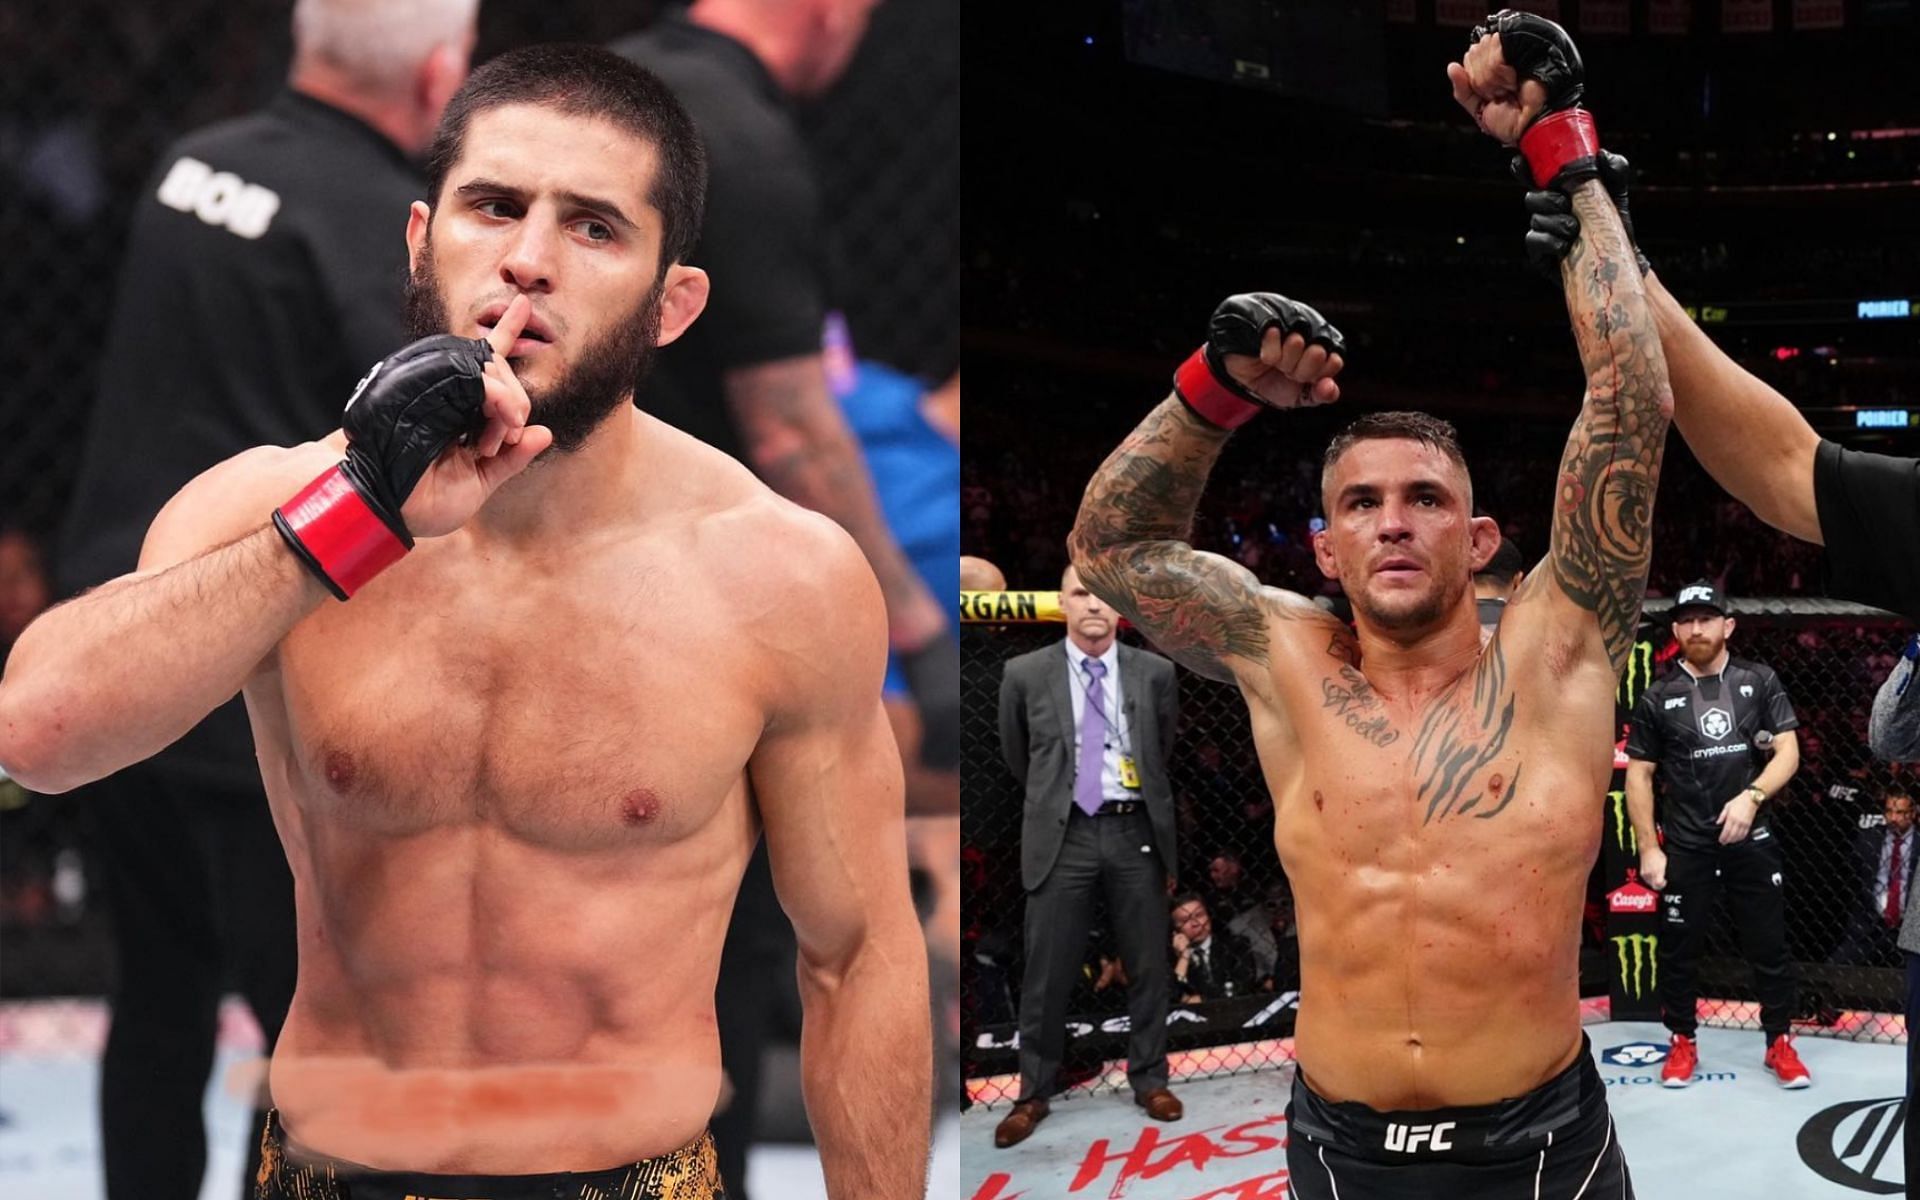 Islam Makhachev (left) predicts how he beats Dustin Poirier (right) at UFC 302 [Photo Courtesy @islam_makhachev and @dustinpoirier on Instagram]